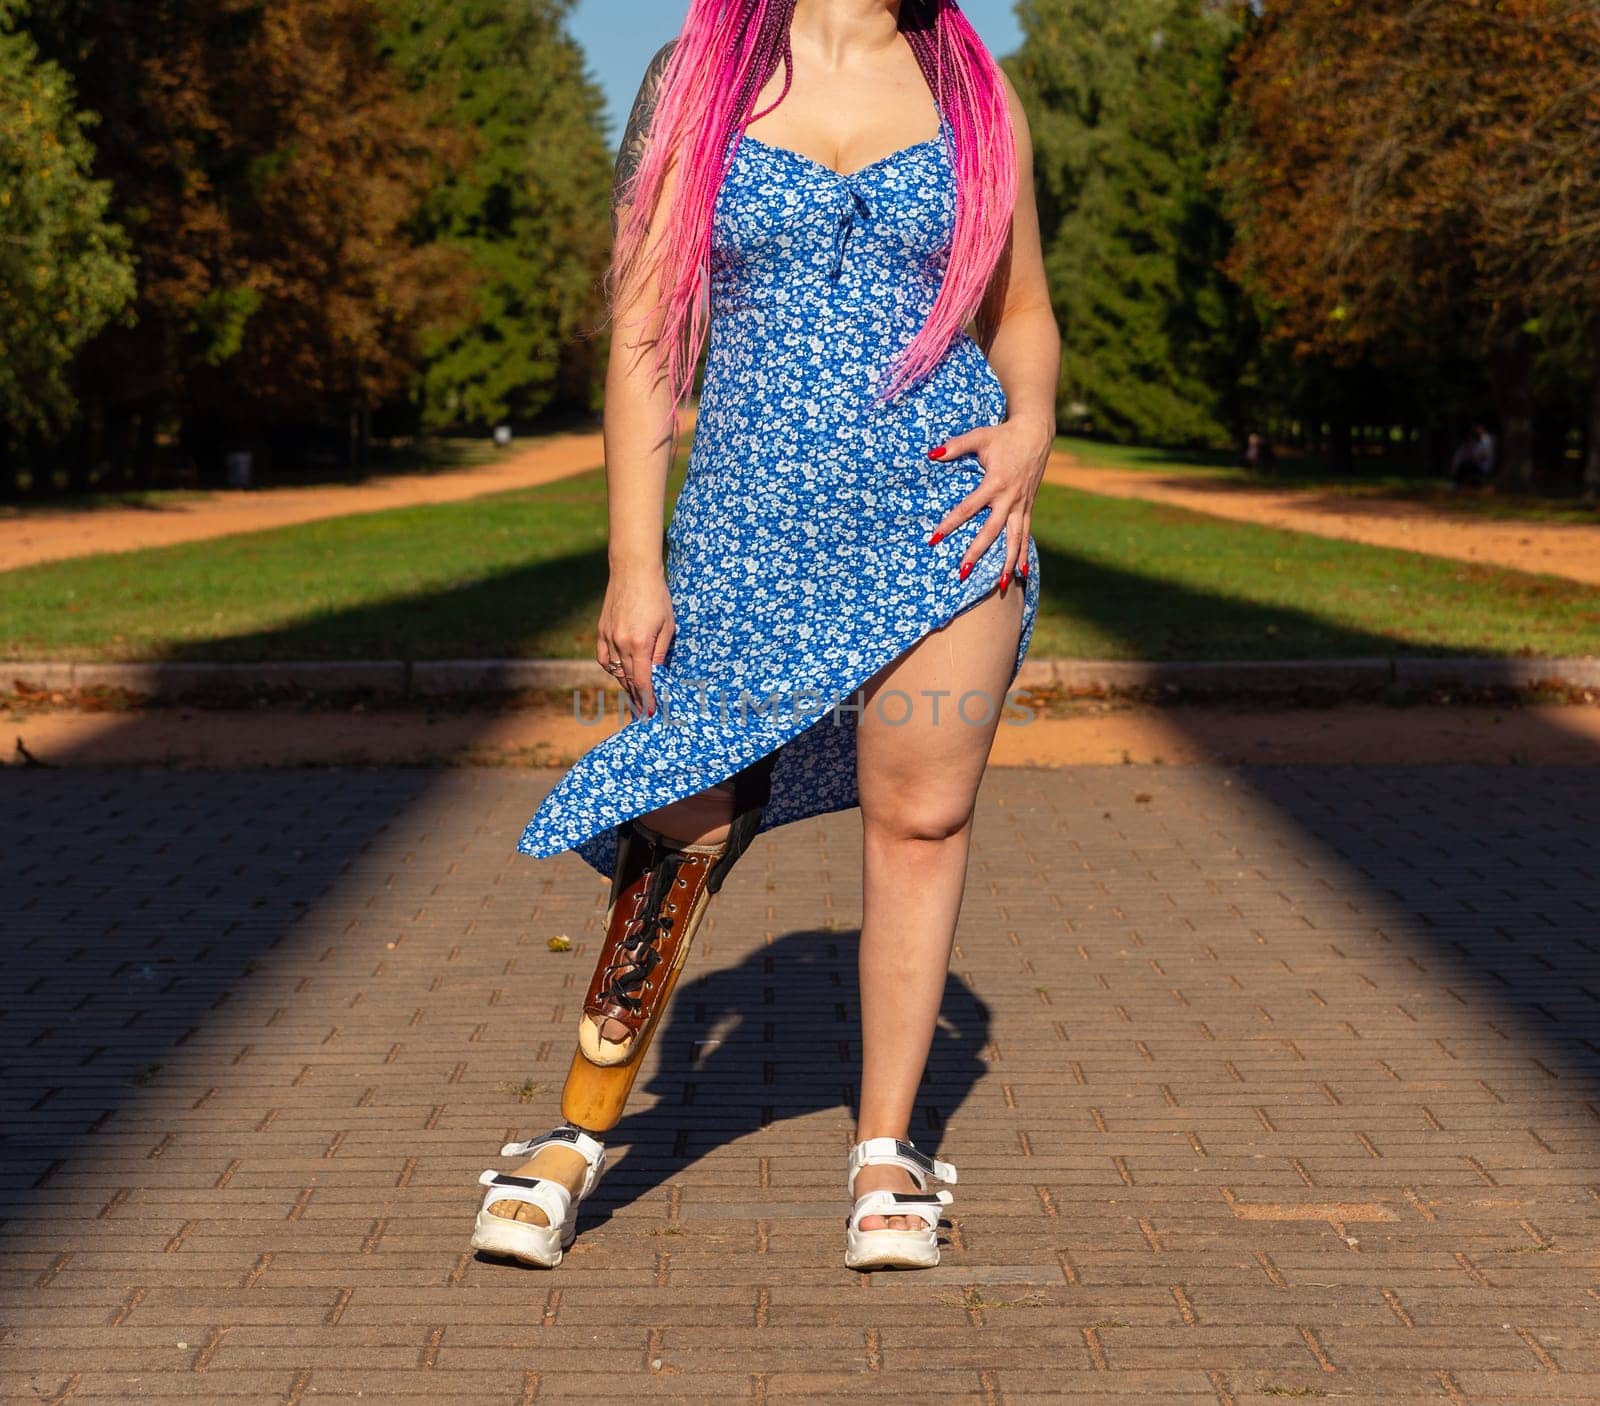 Beautiful young woman leg amputee in a dress walking in park at sunny day. by BY-_-BY